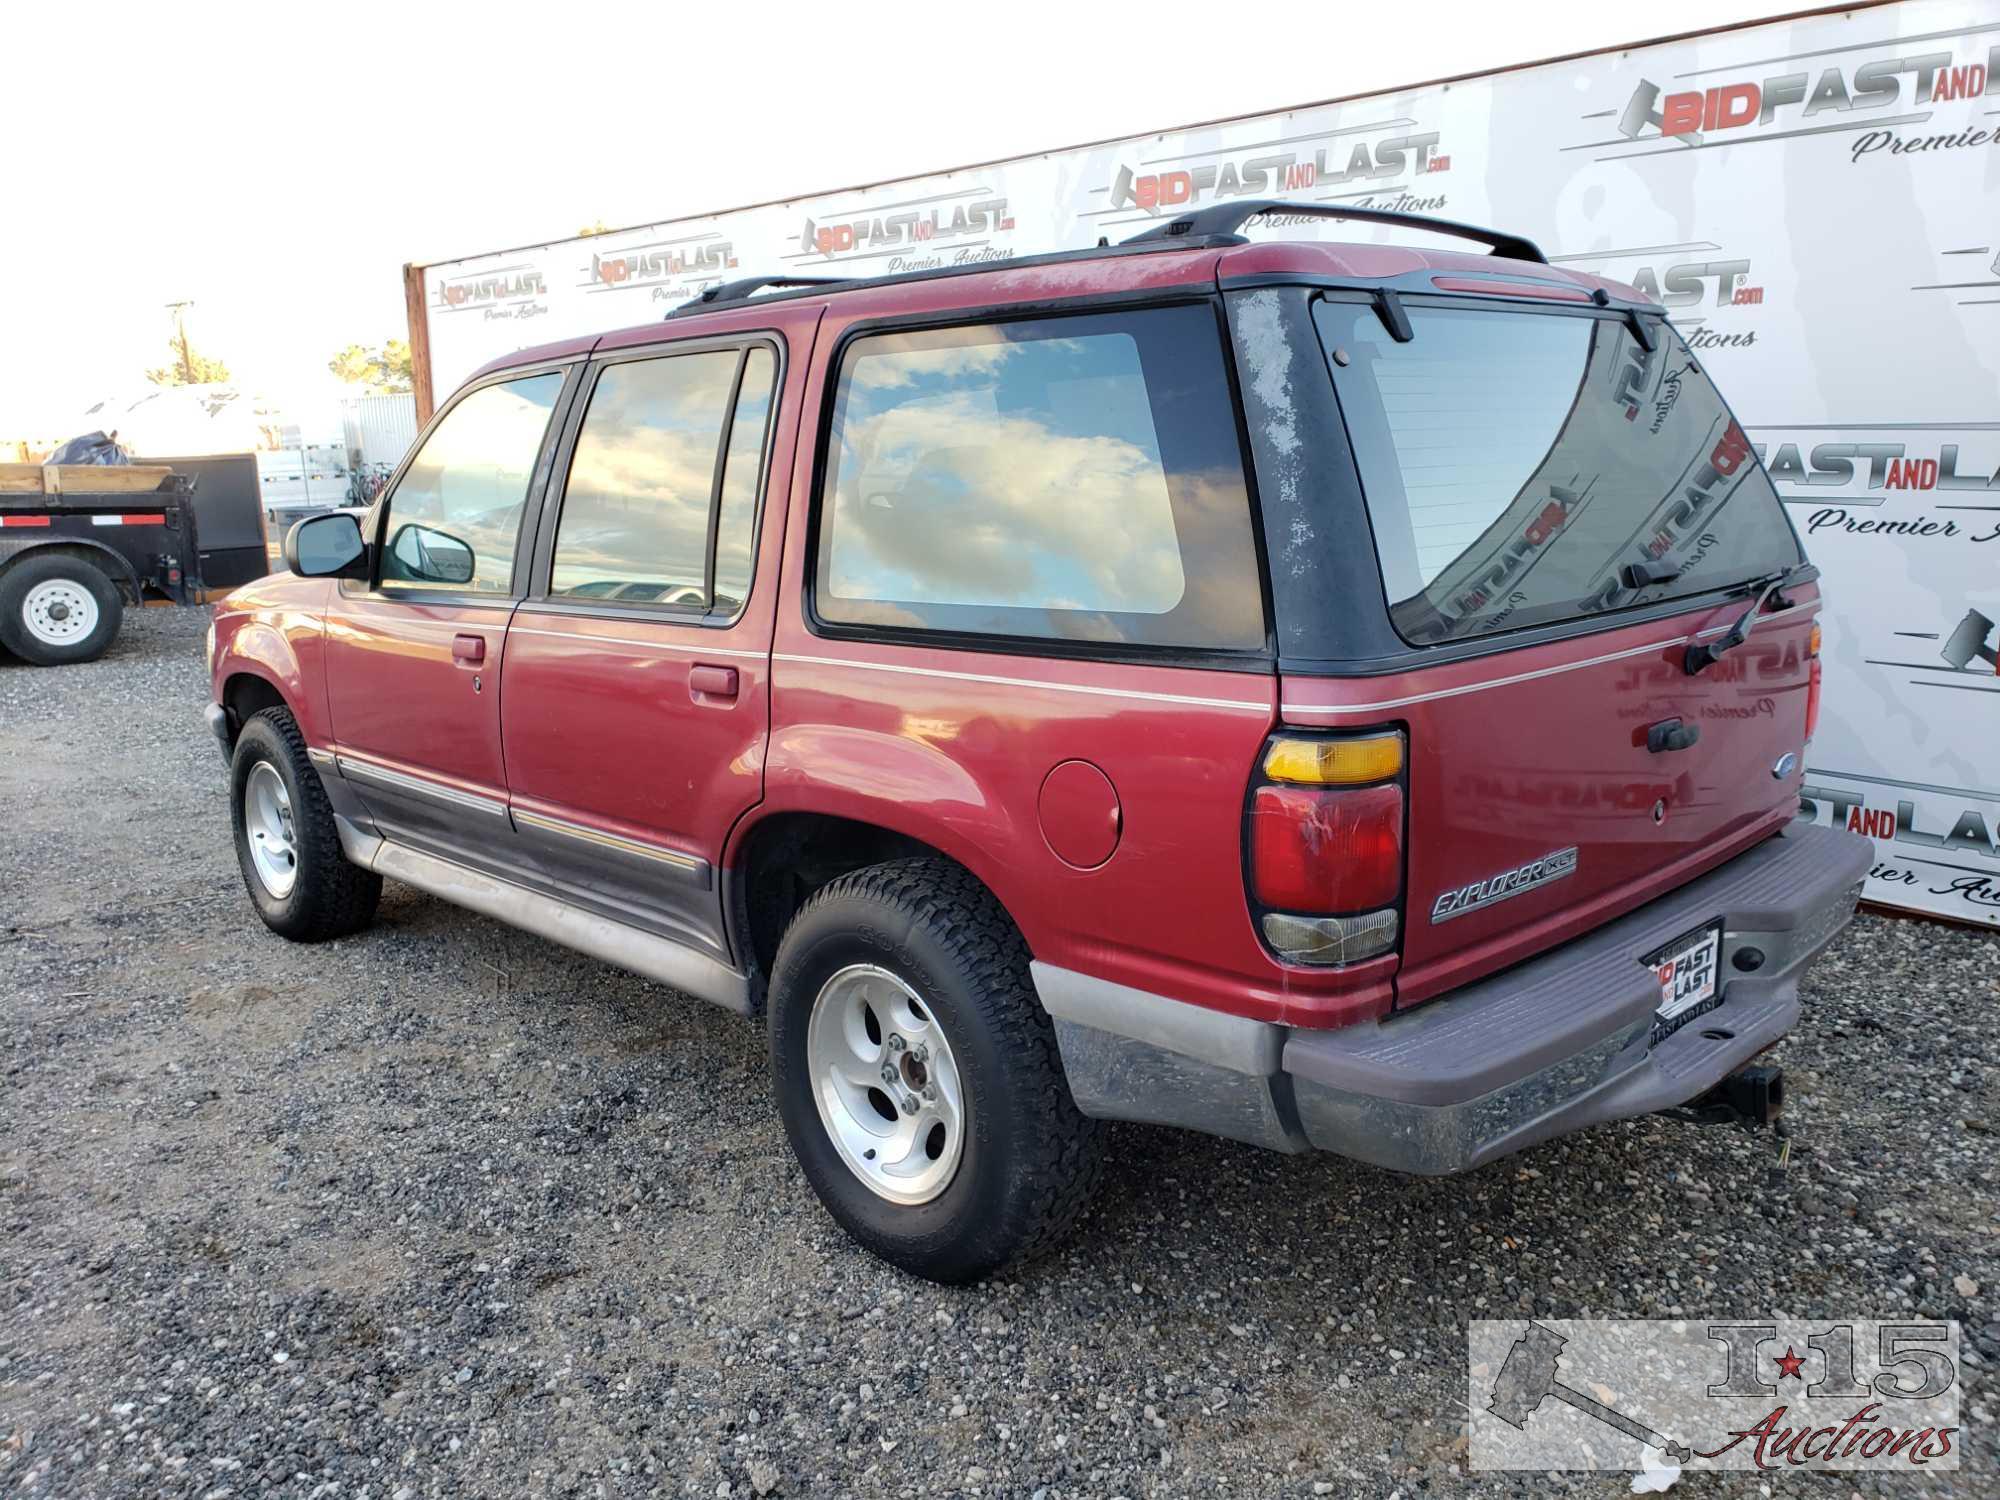 1996 Ford Explorer, DEALER OR OUT OF STATE ONLY!!